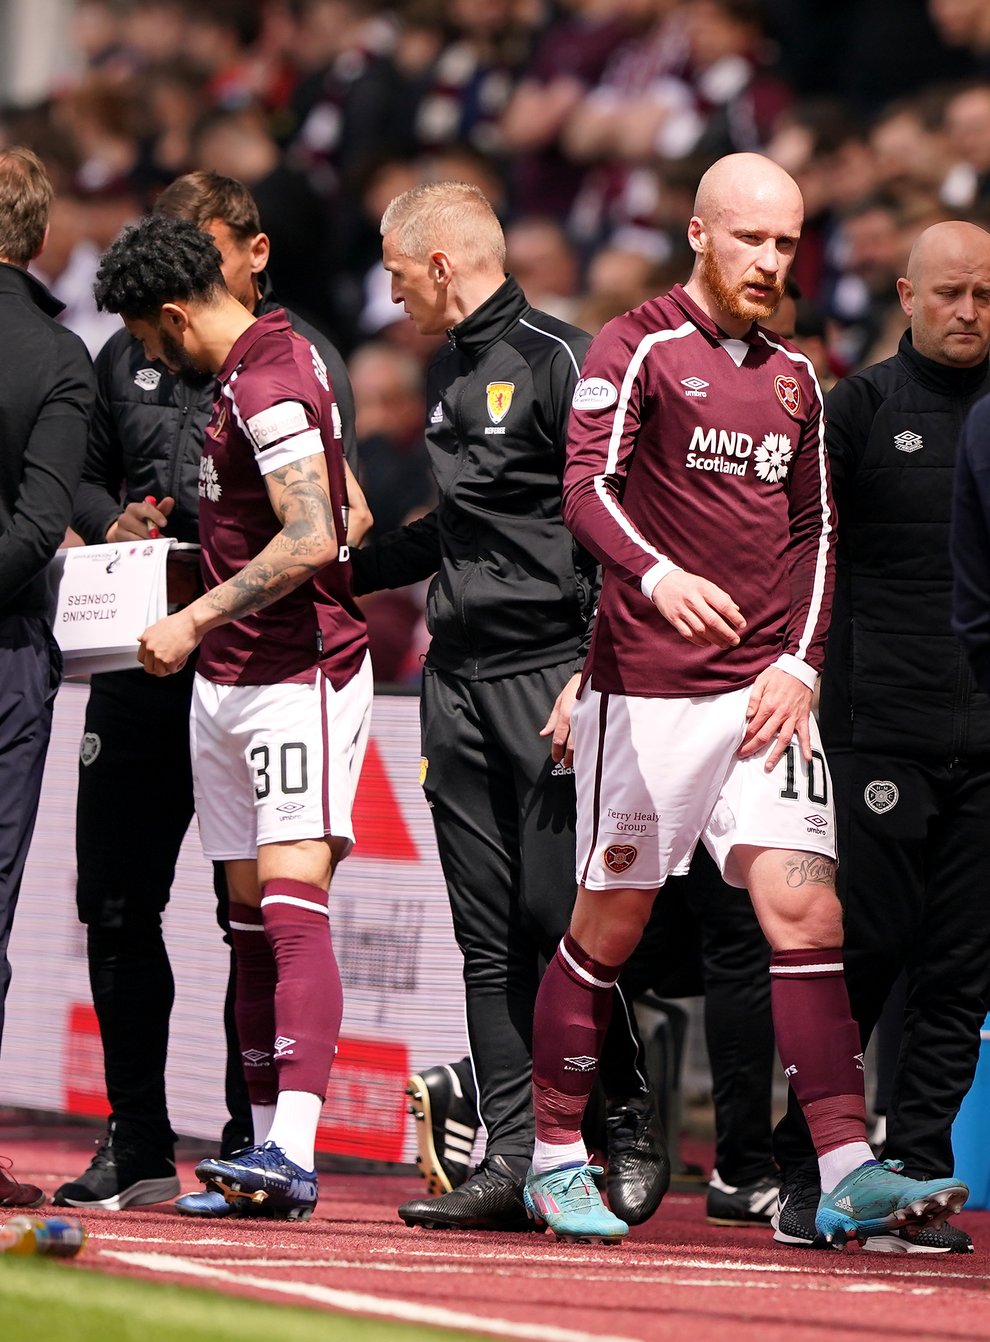 Hearts’ Liam Boyce went off injured against Rangers (Andrew Milligan/PA)